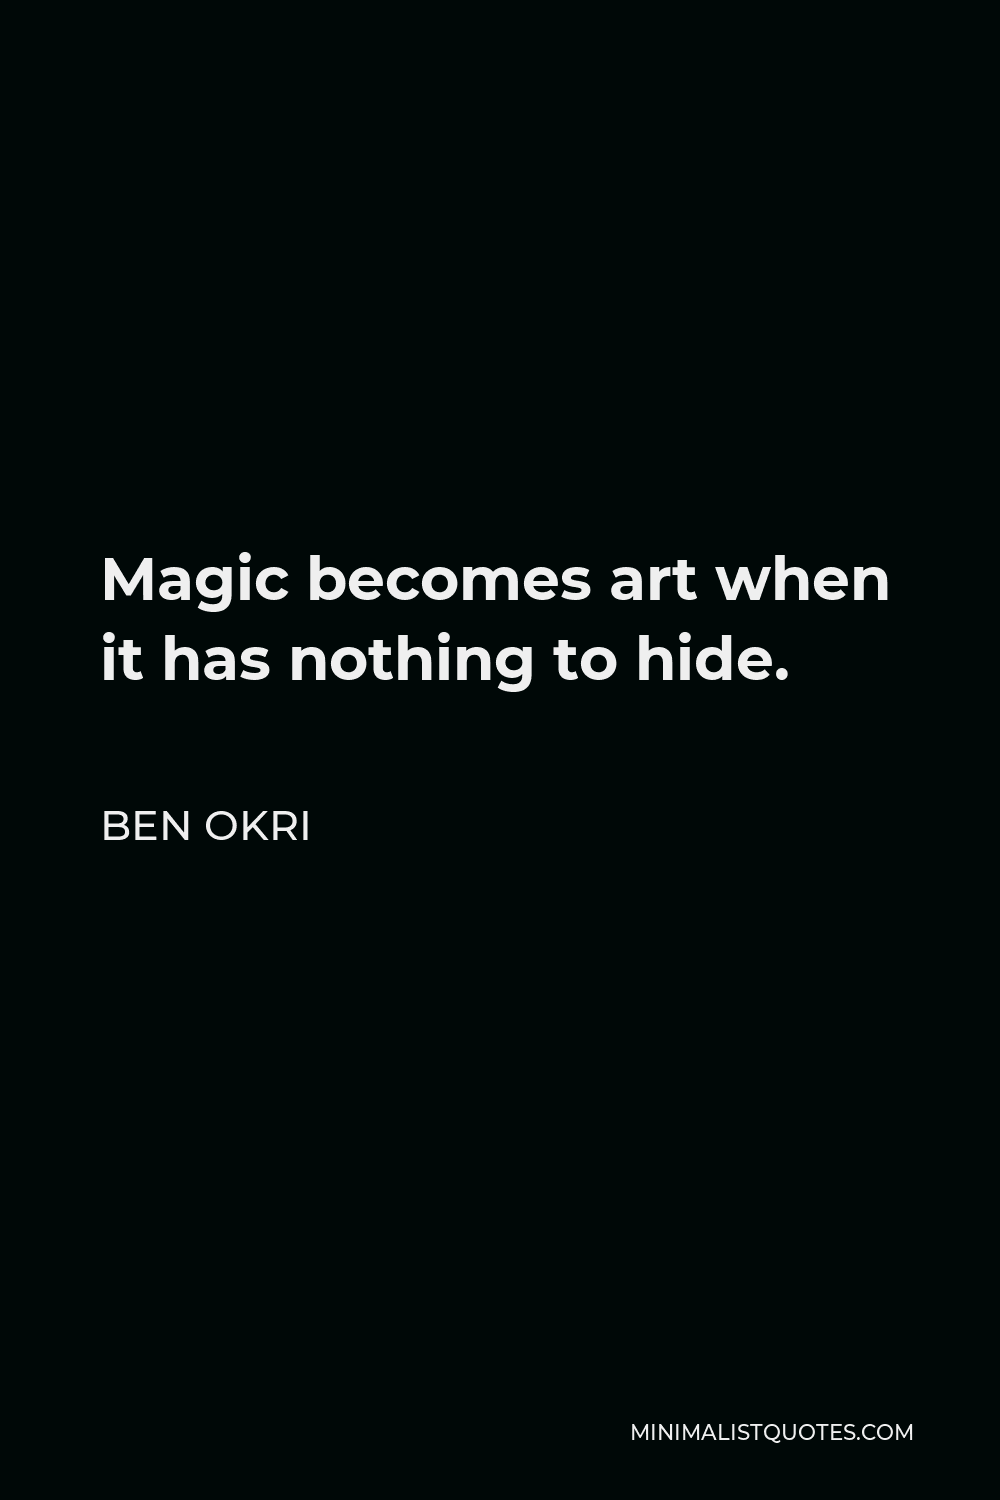 Ben Okri Quote - Magic becomes art when it has nothing to hide.